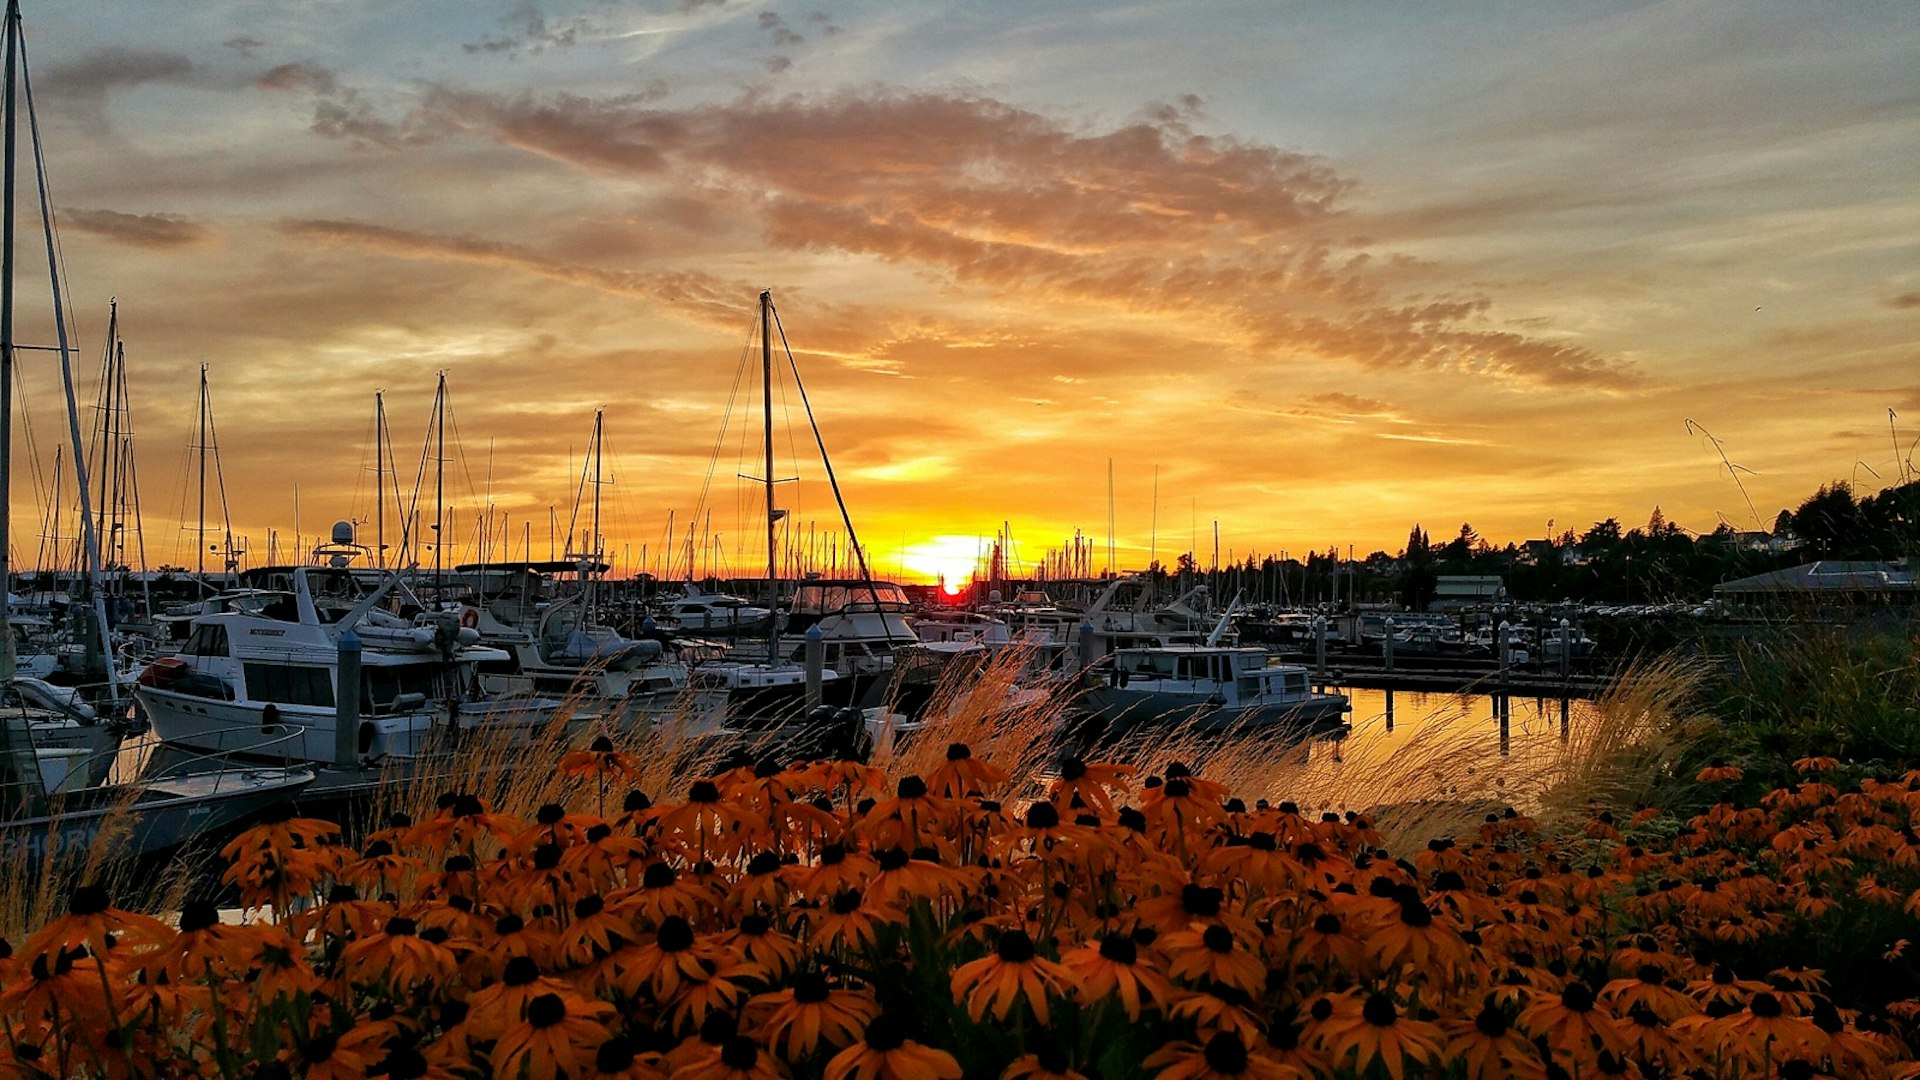 Late summer sunset over the Marina in Bellingham Washington, with lots of boats docked and a flowering bush in the foreground